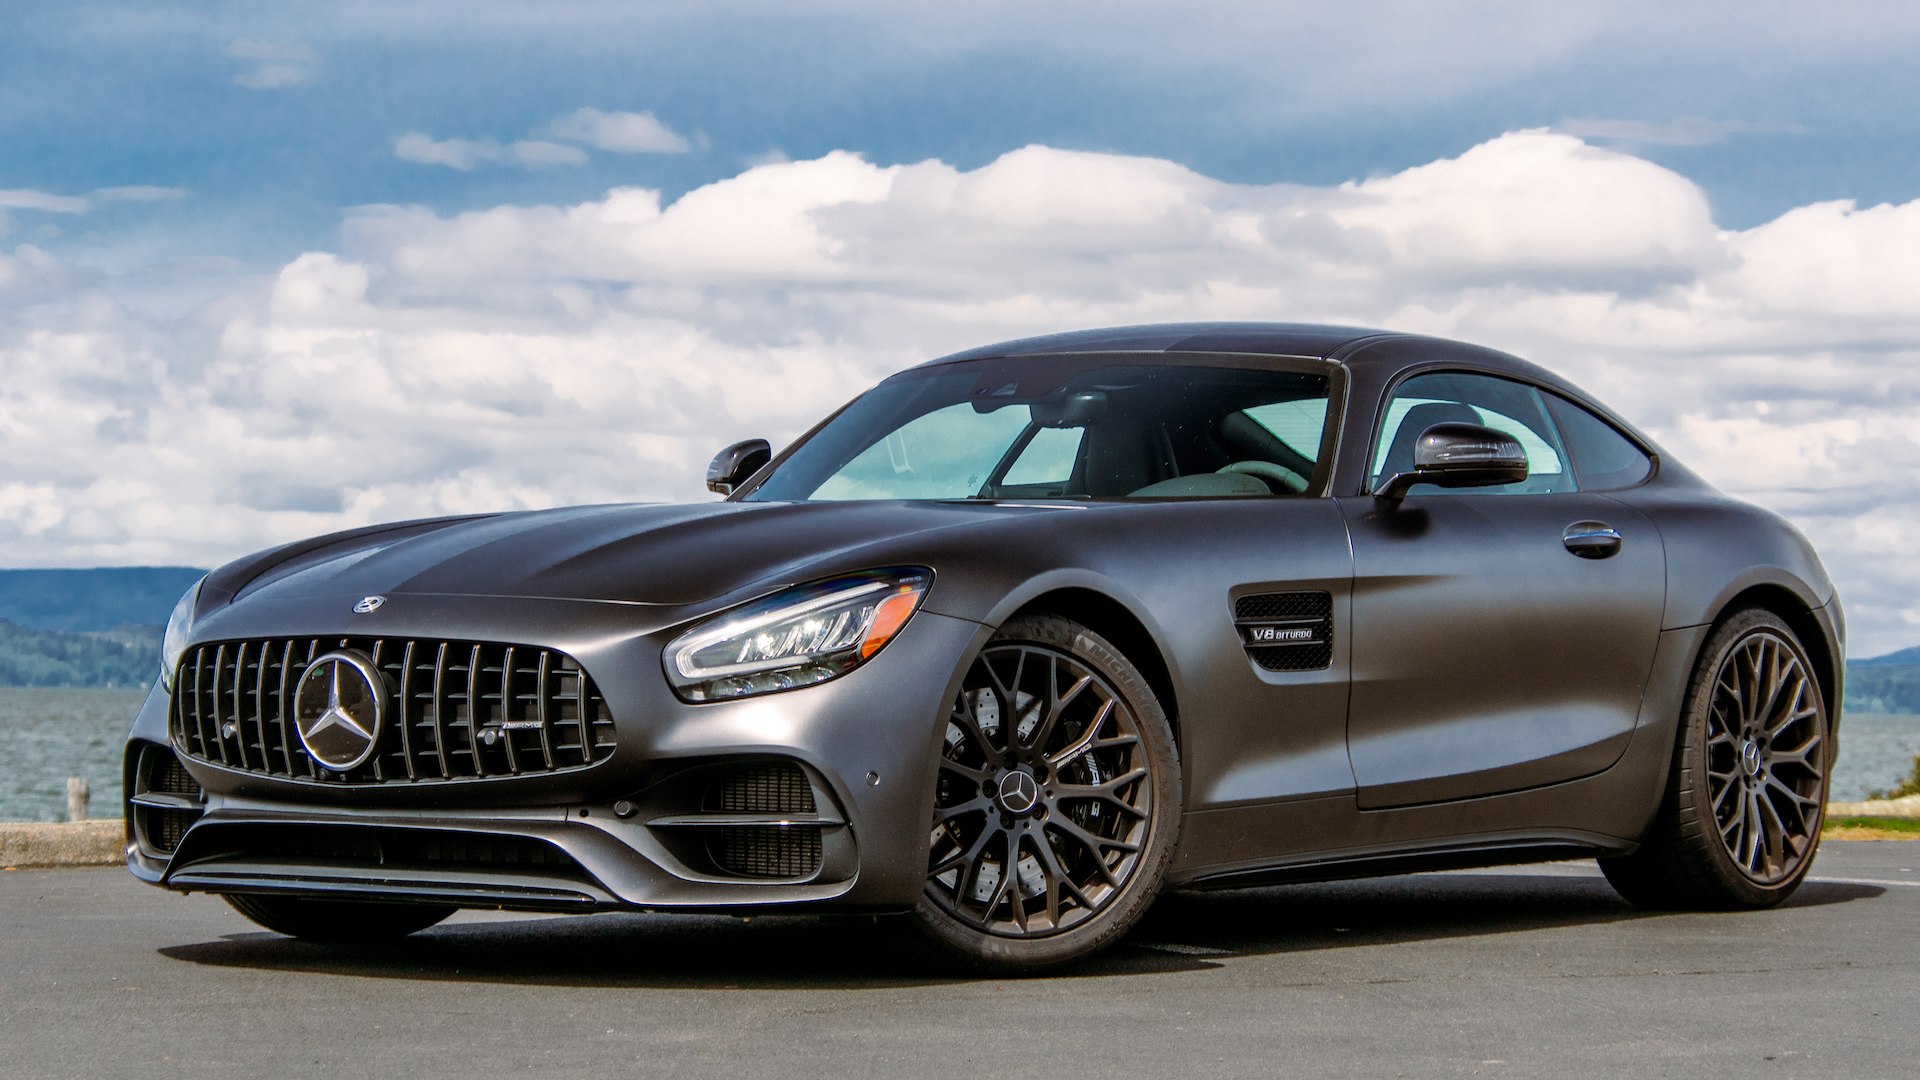 onderdak Rijp Amfibisch 2021 Mercedes-AMG GT Stealth Edition Review: A Road Trip, Revelation, and  Romance